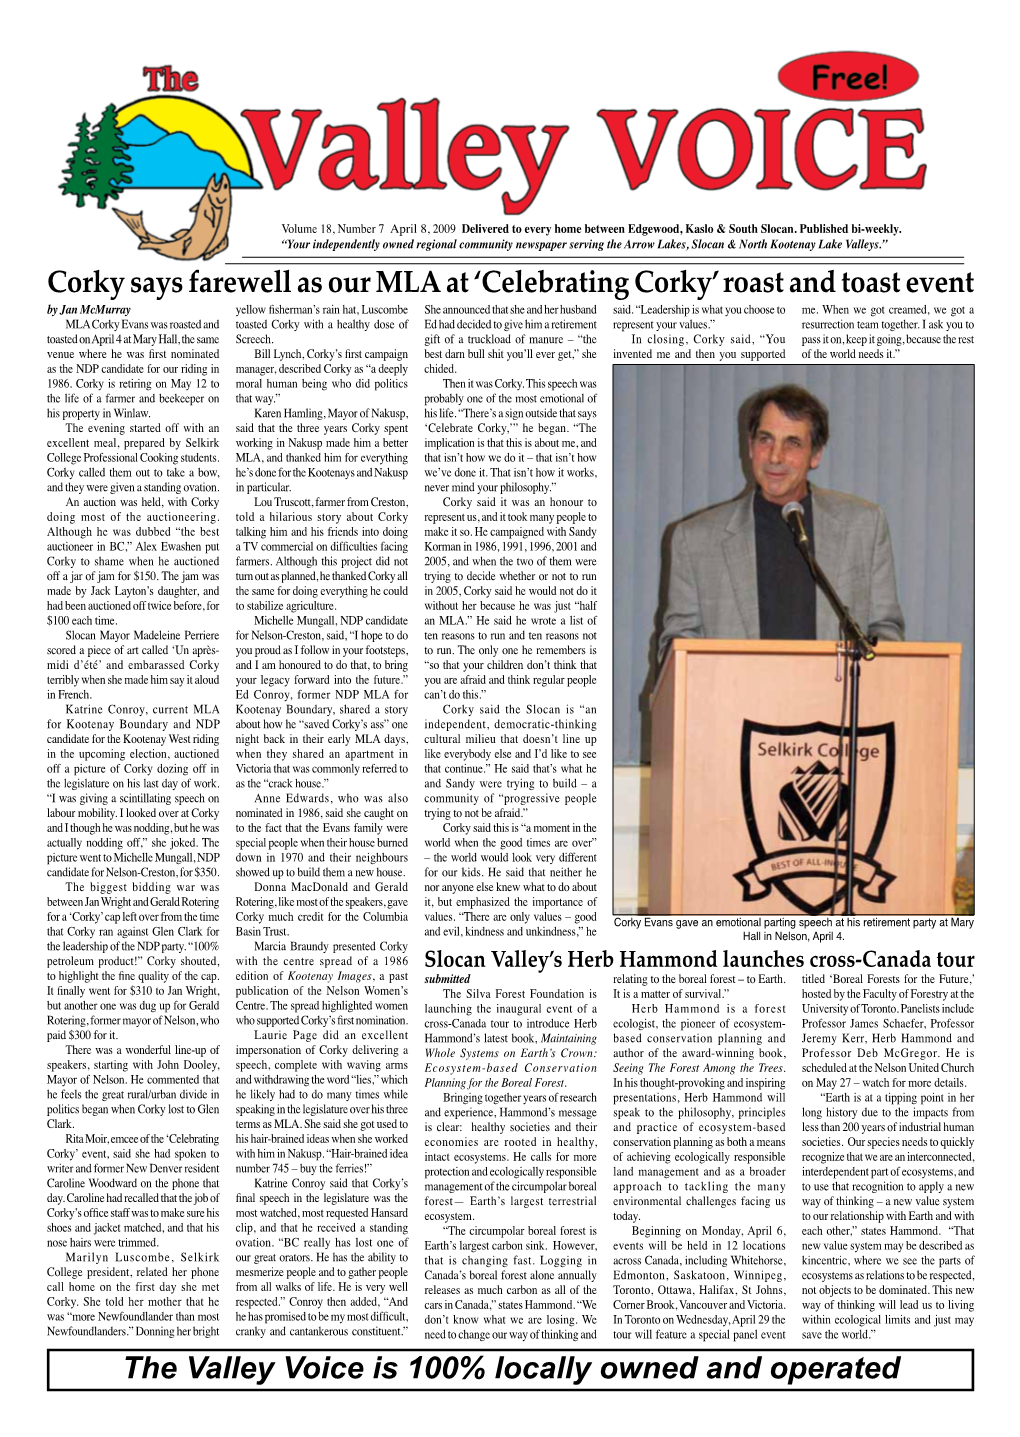 The Valley Voice Is 100% Locally Owned and Operated Corky Says